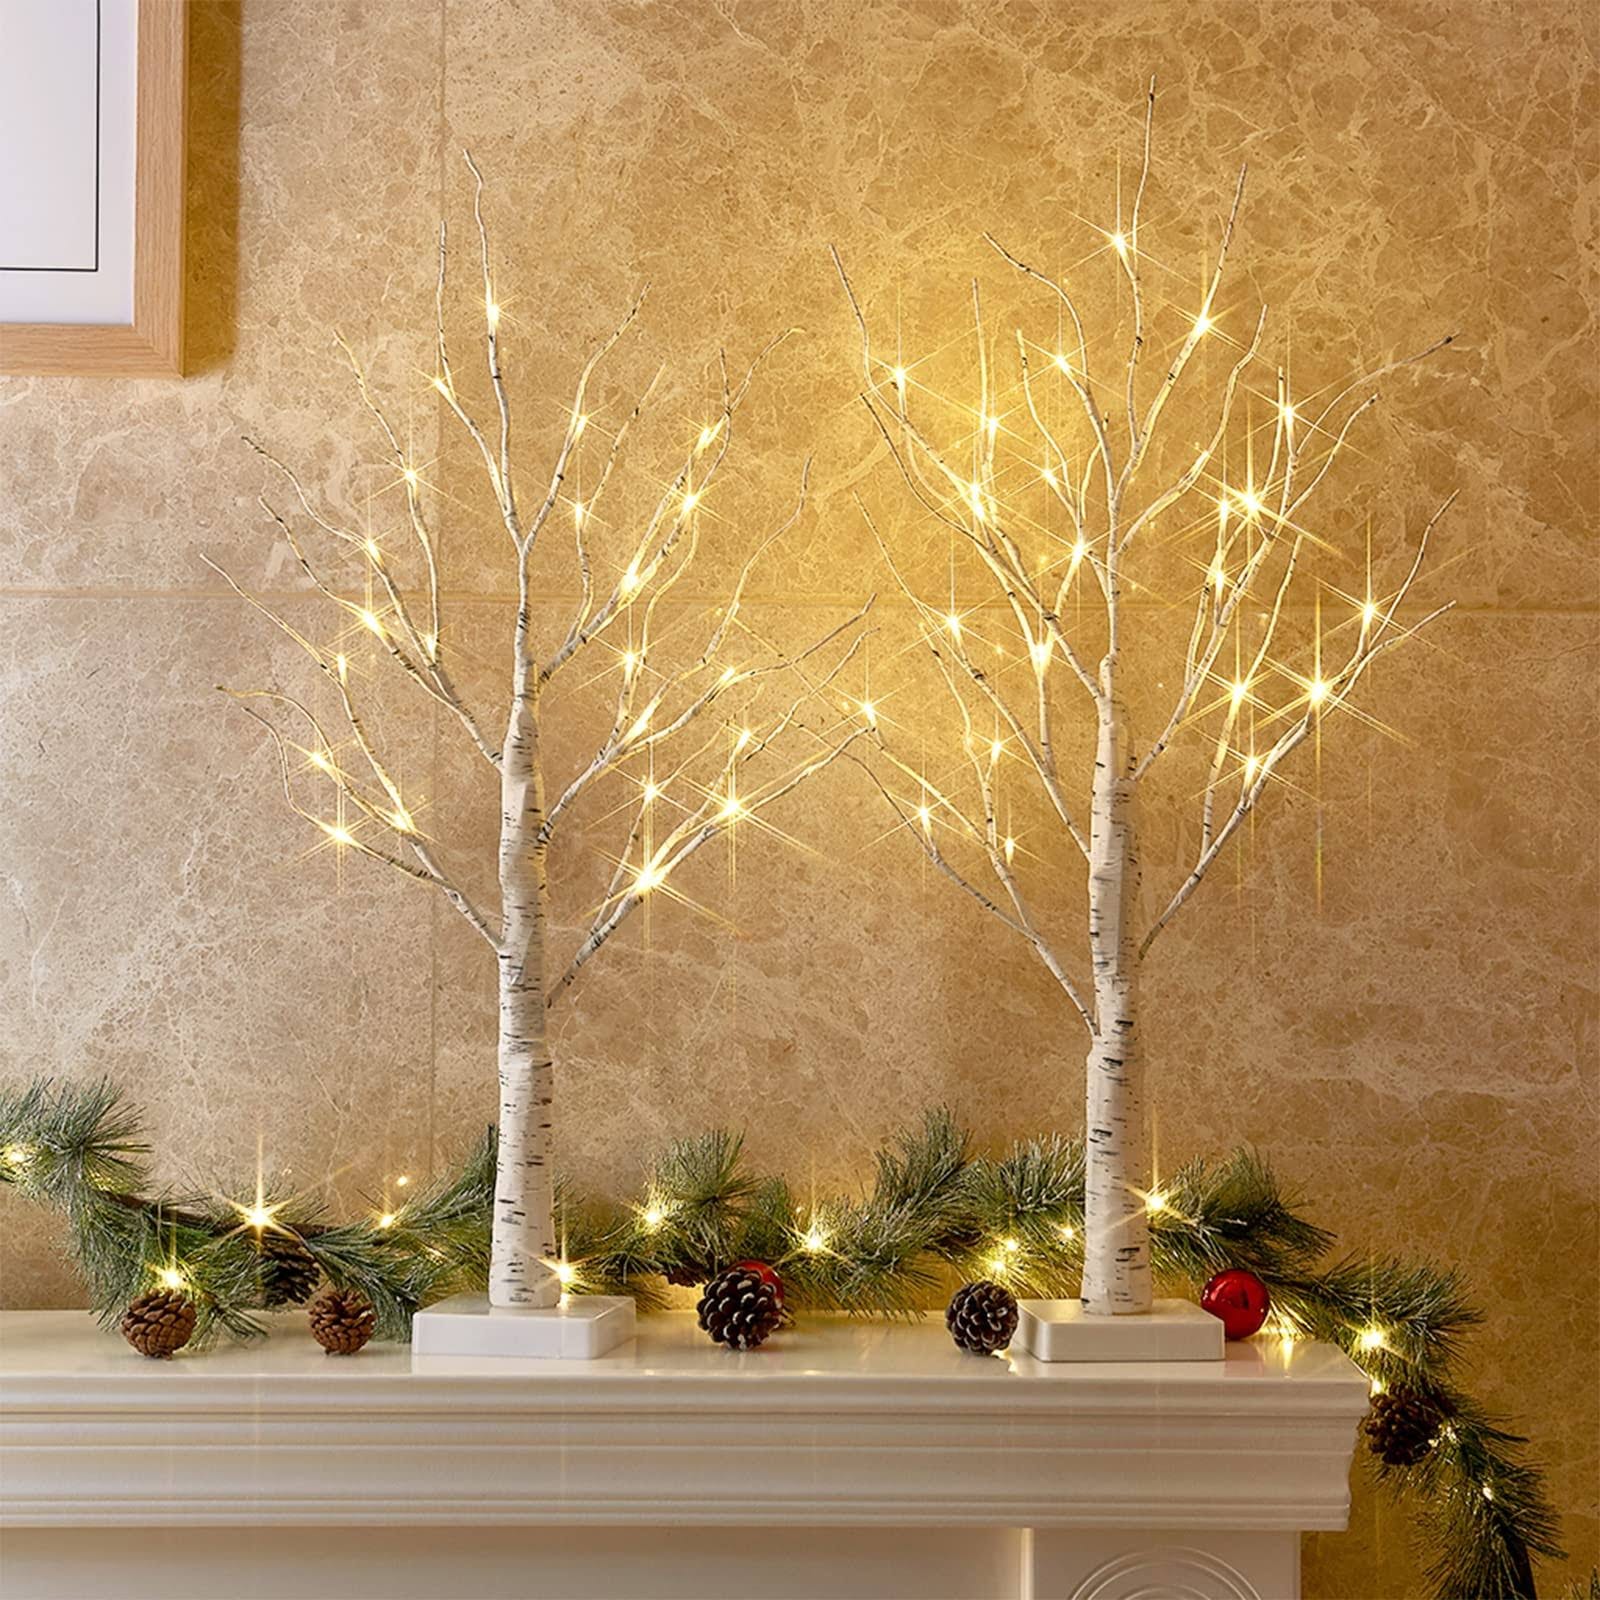 PEIDUO Christmas Decorations: Birch Tree with LED Lights for Festive Indoor Decor | Image